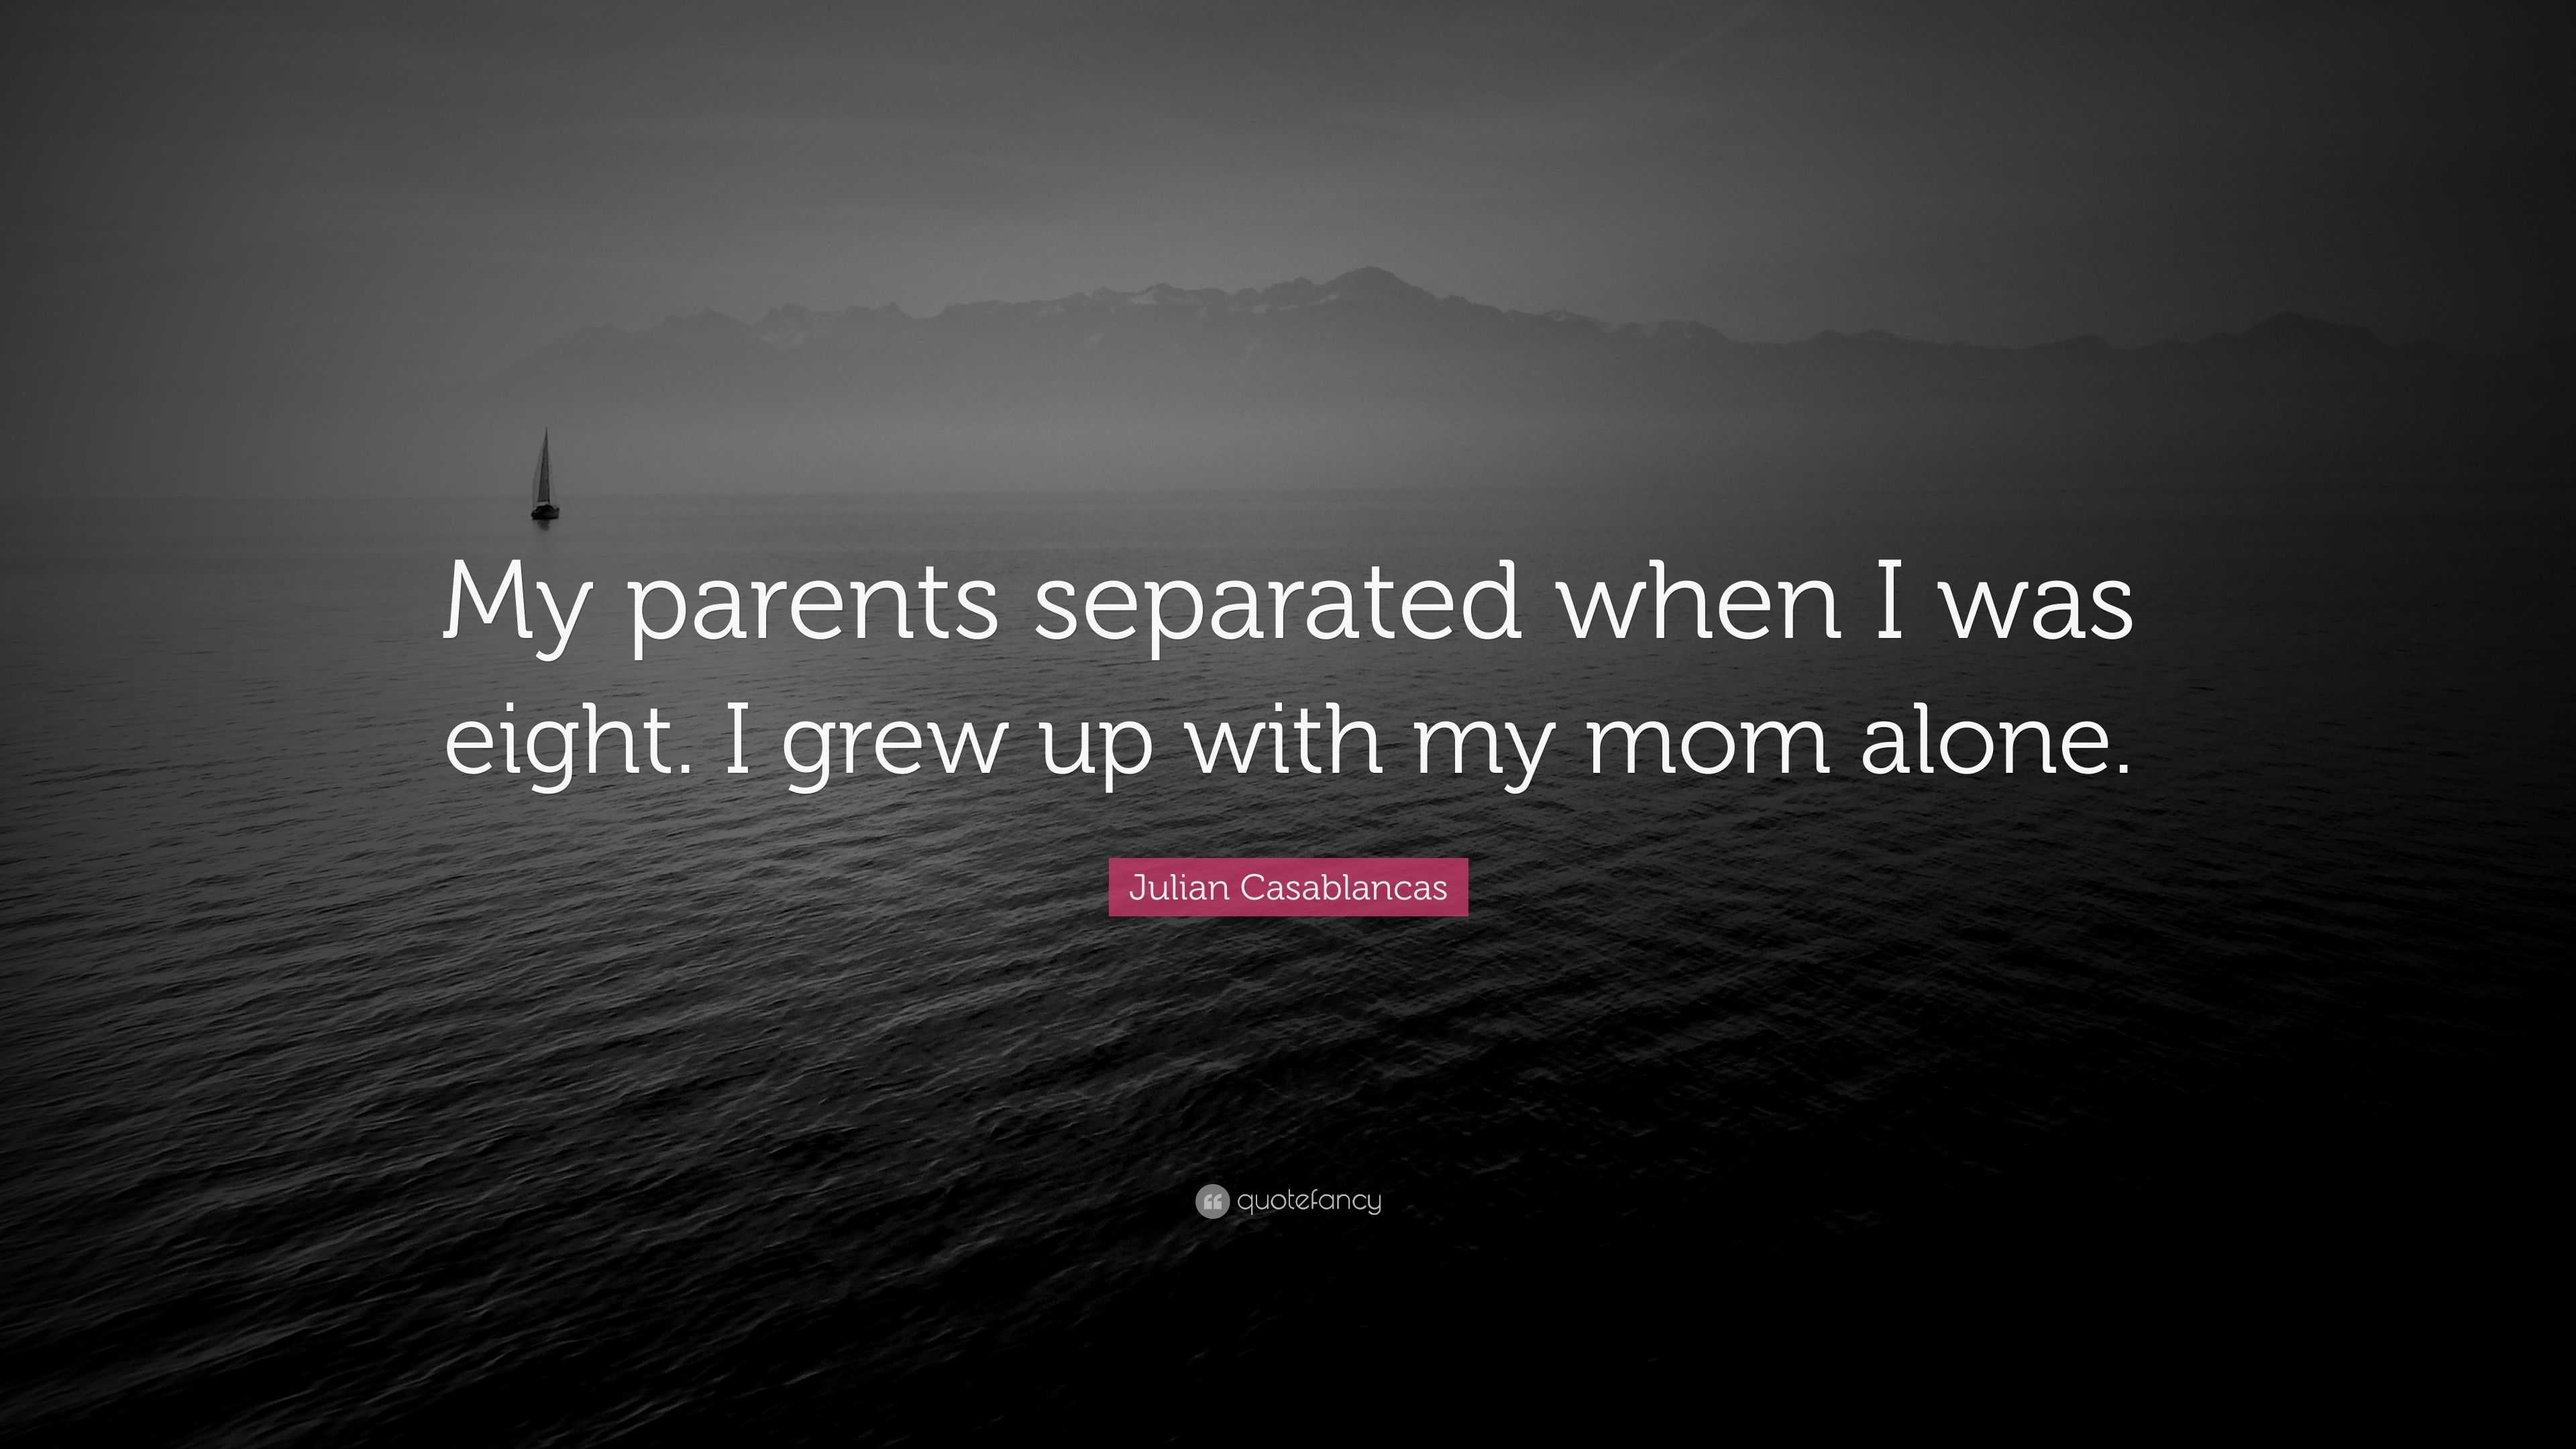 Julian Casablancas Quote: “My parents separated when I was eight. I ...